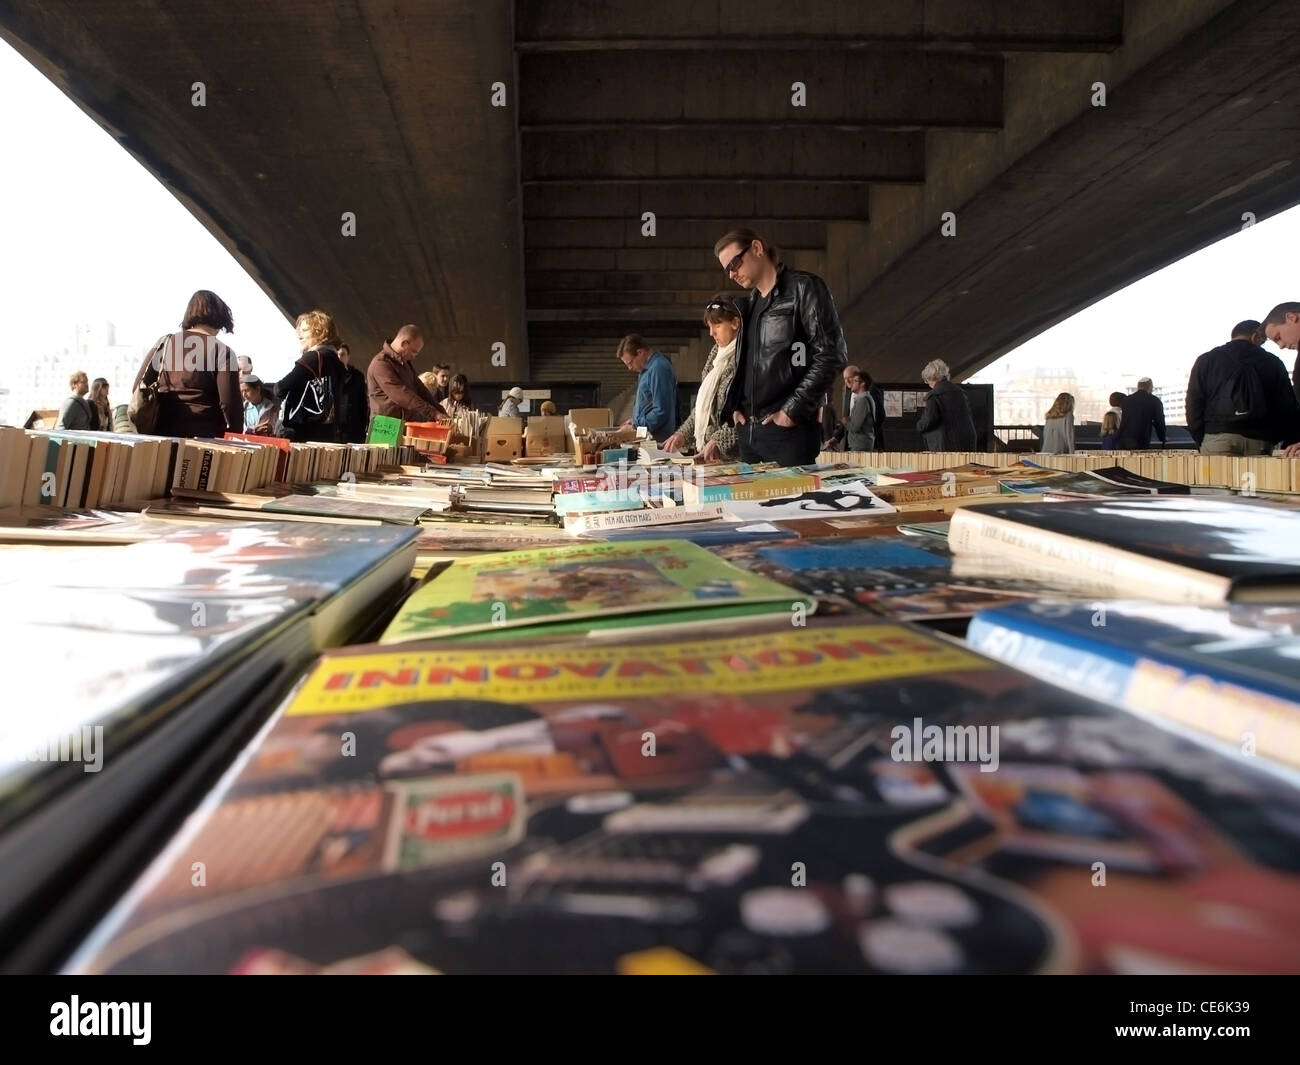 People browse the second hand books at the Waterloo Bridge Book Market Stock Photo